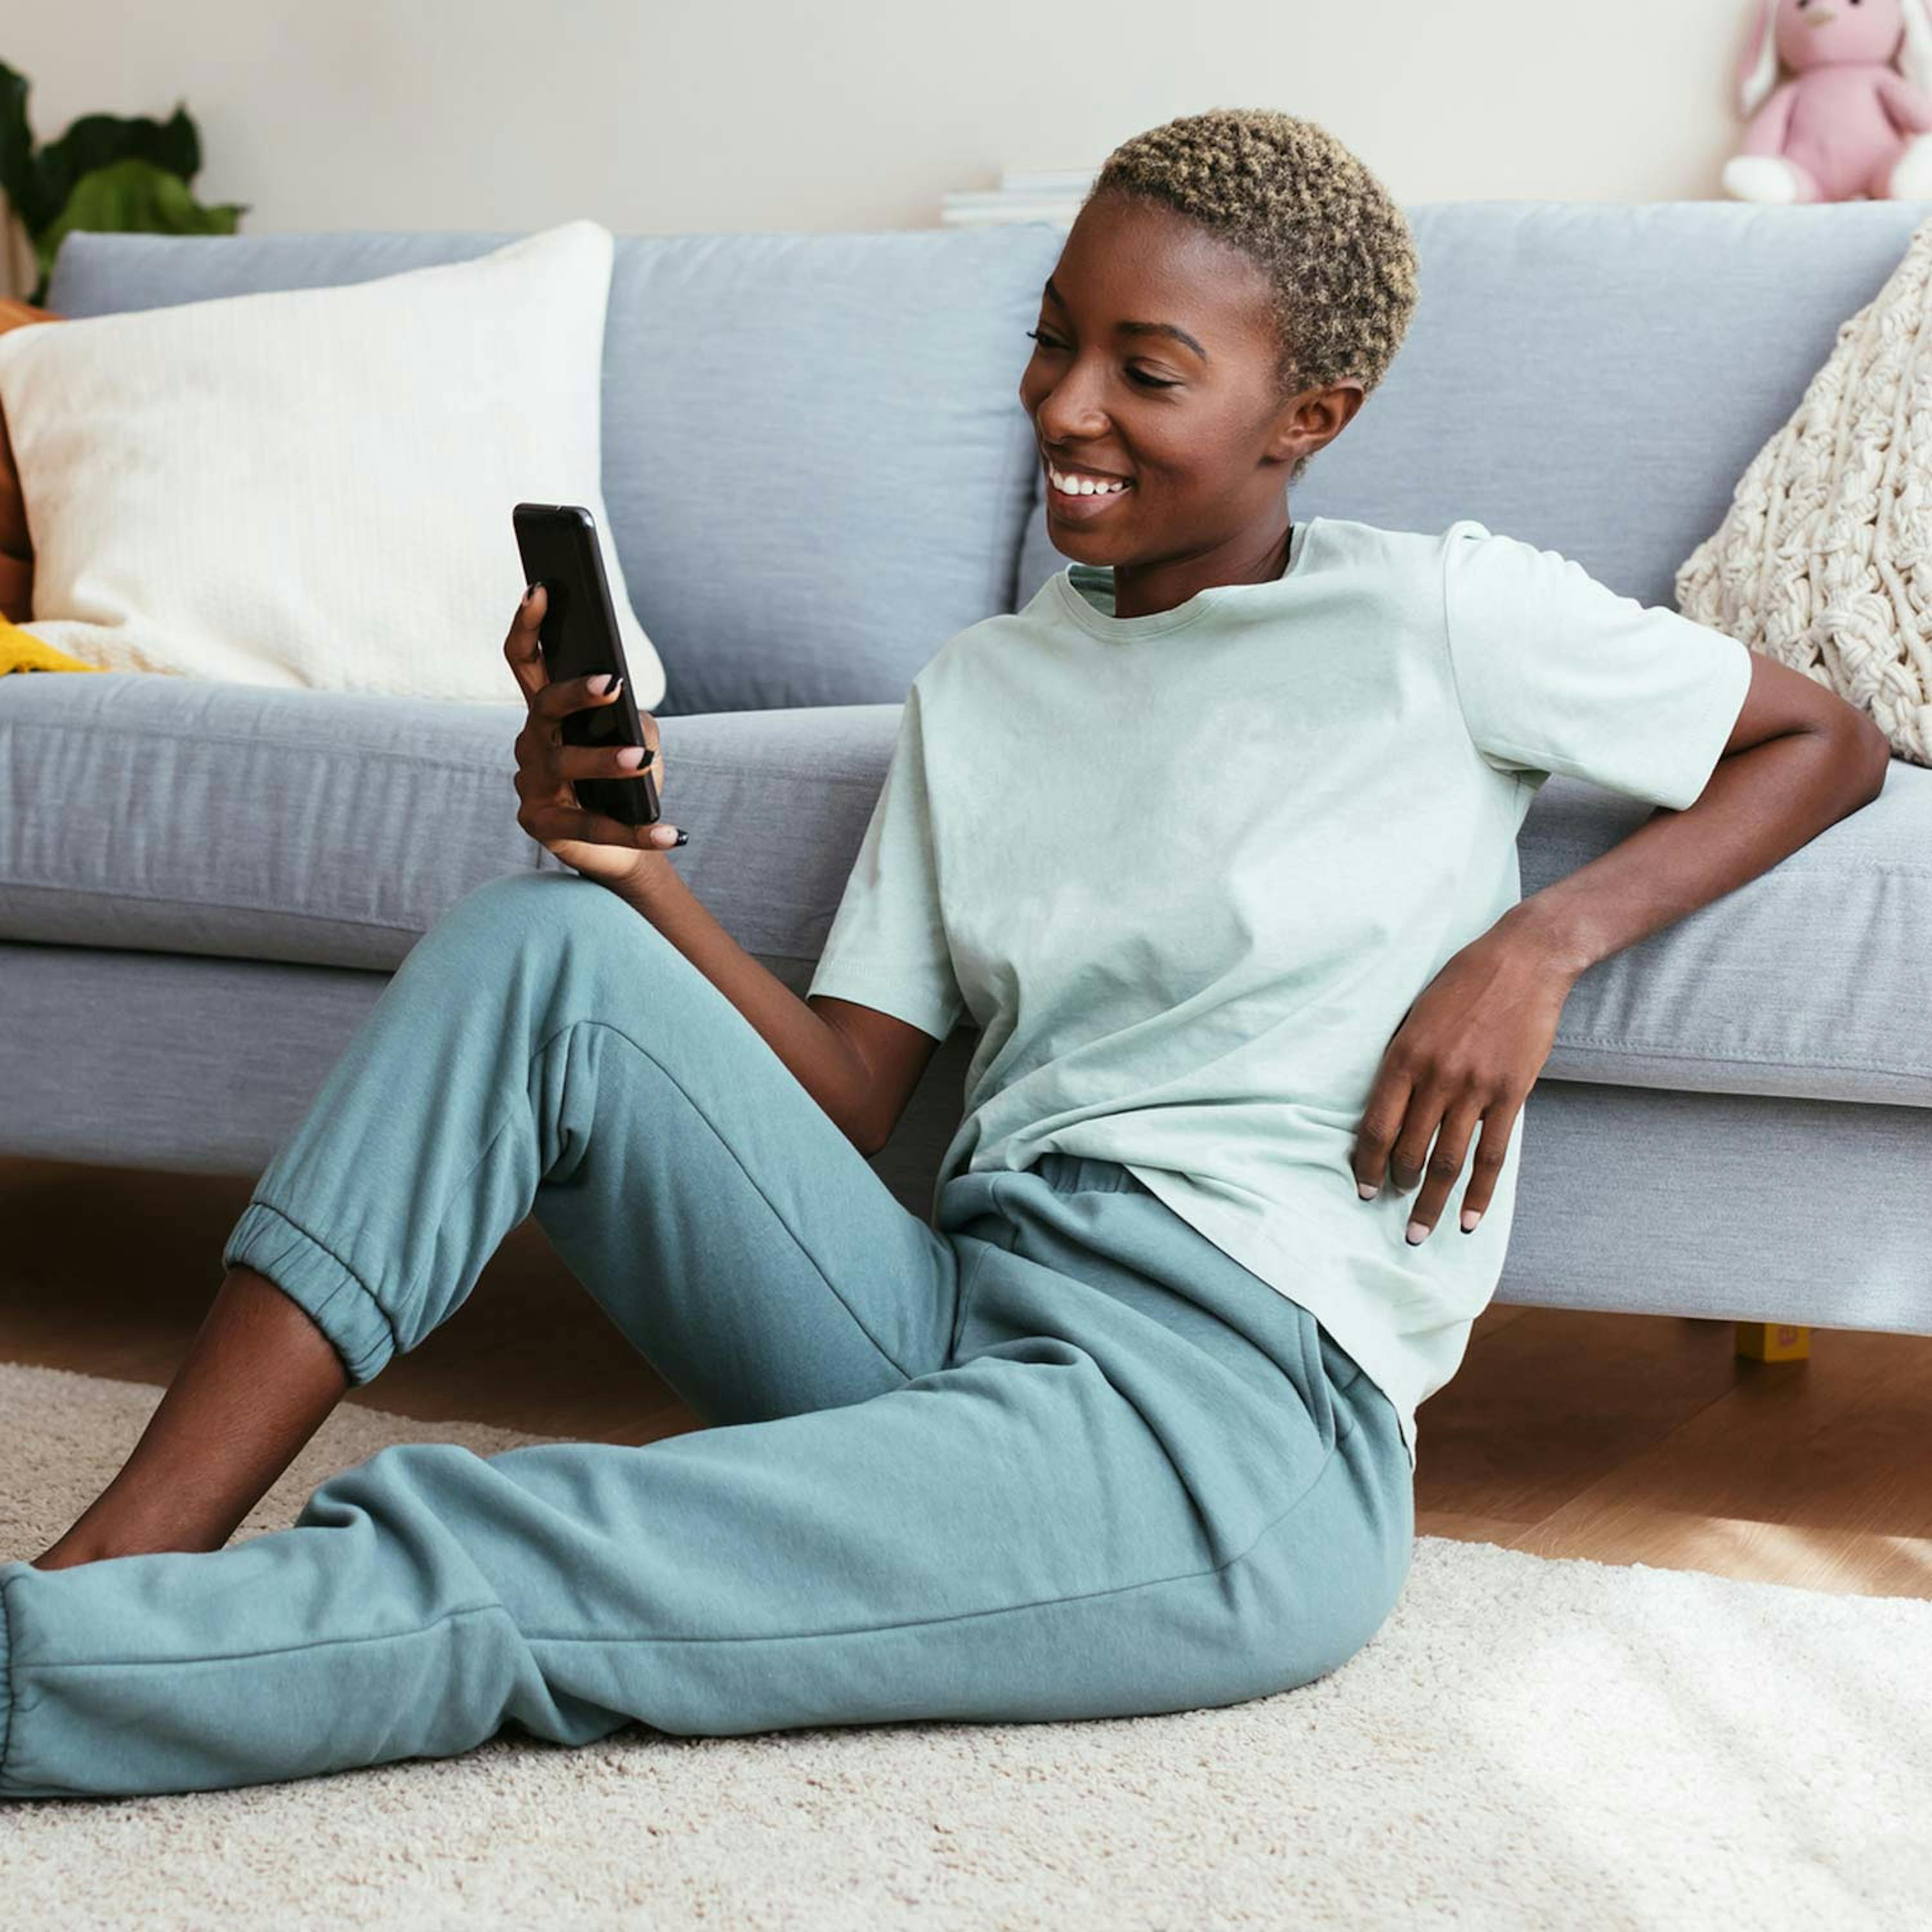 Smiling woman with smartphone sitting on floor in front of couch 